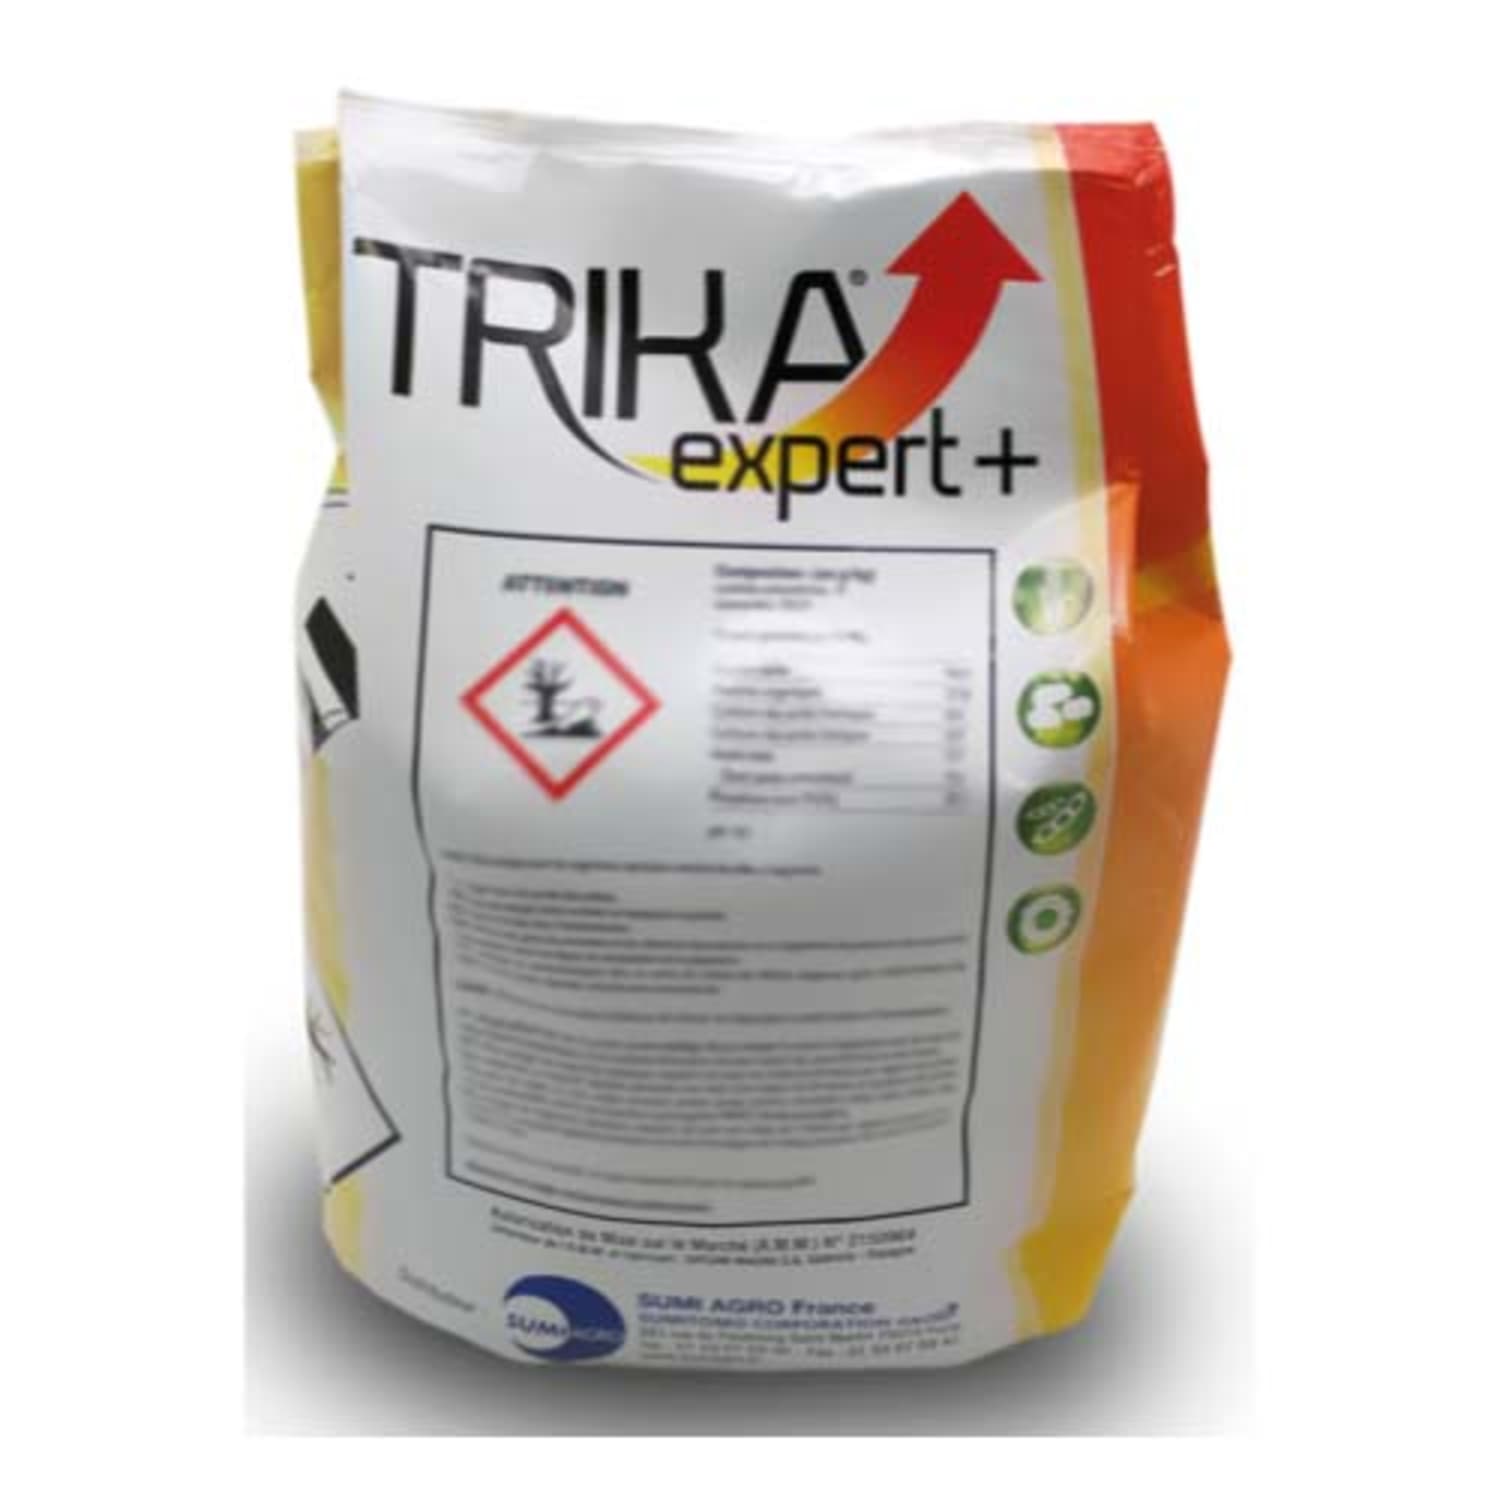 INSECTICIDE - TRIKA EXPERT +